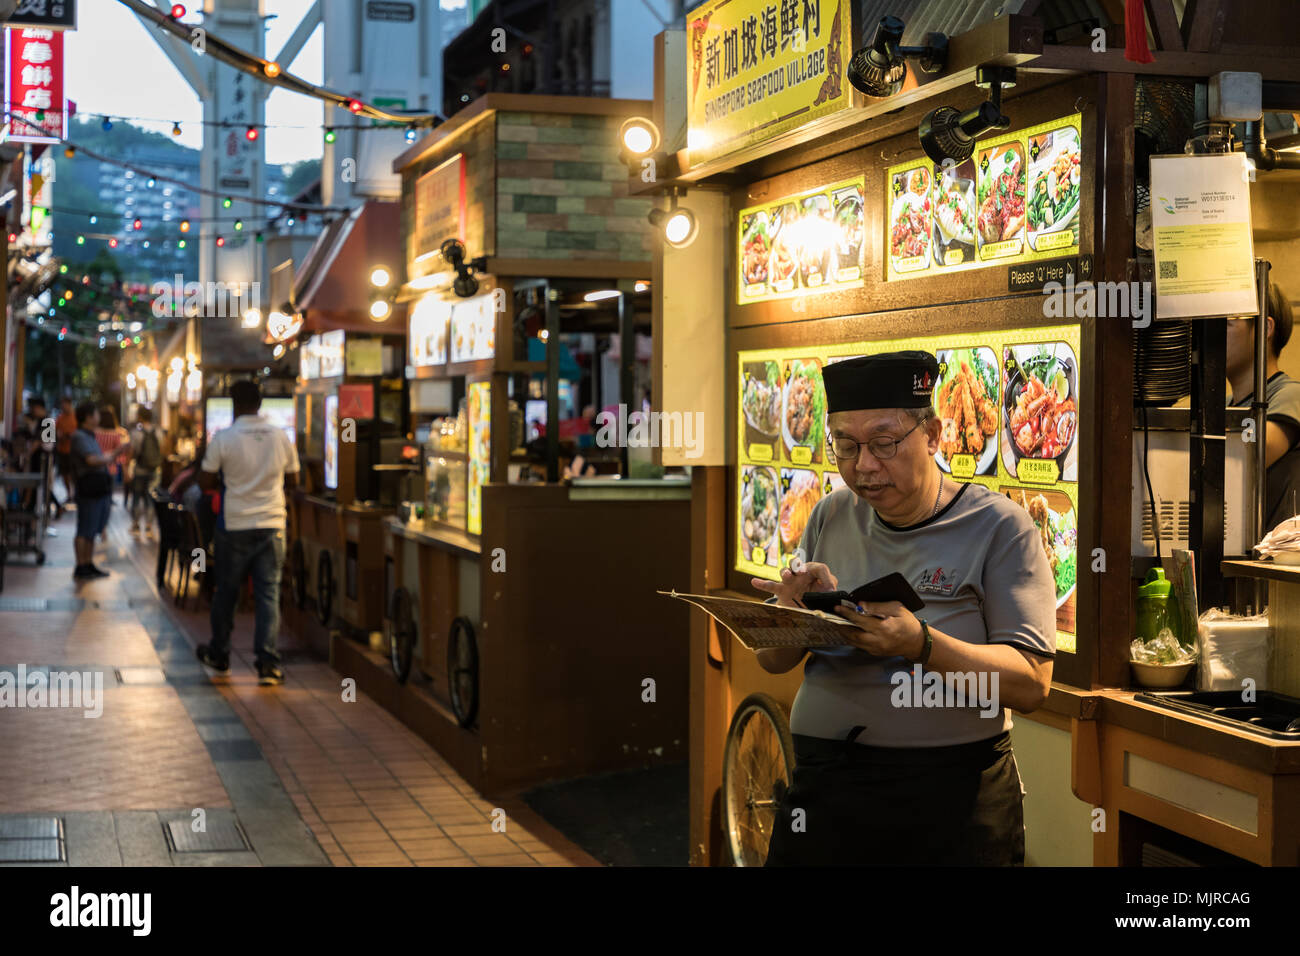 Singapore - March 24, 2018: A food vendor studies his mobile phone while holding a menu at Chinatown's food street as he waits for the evening crowd t Stock Photo